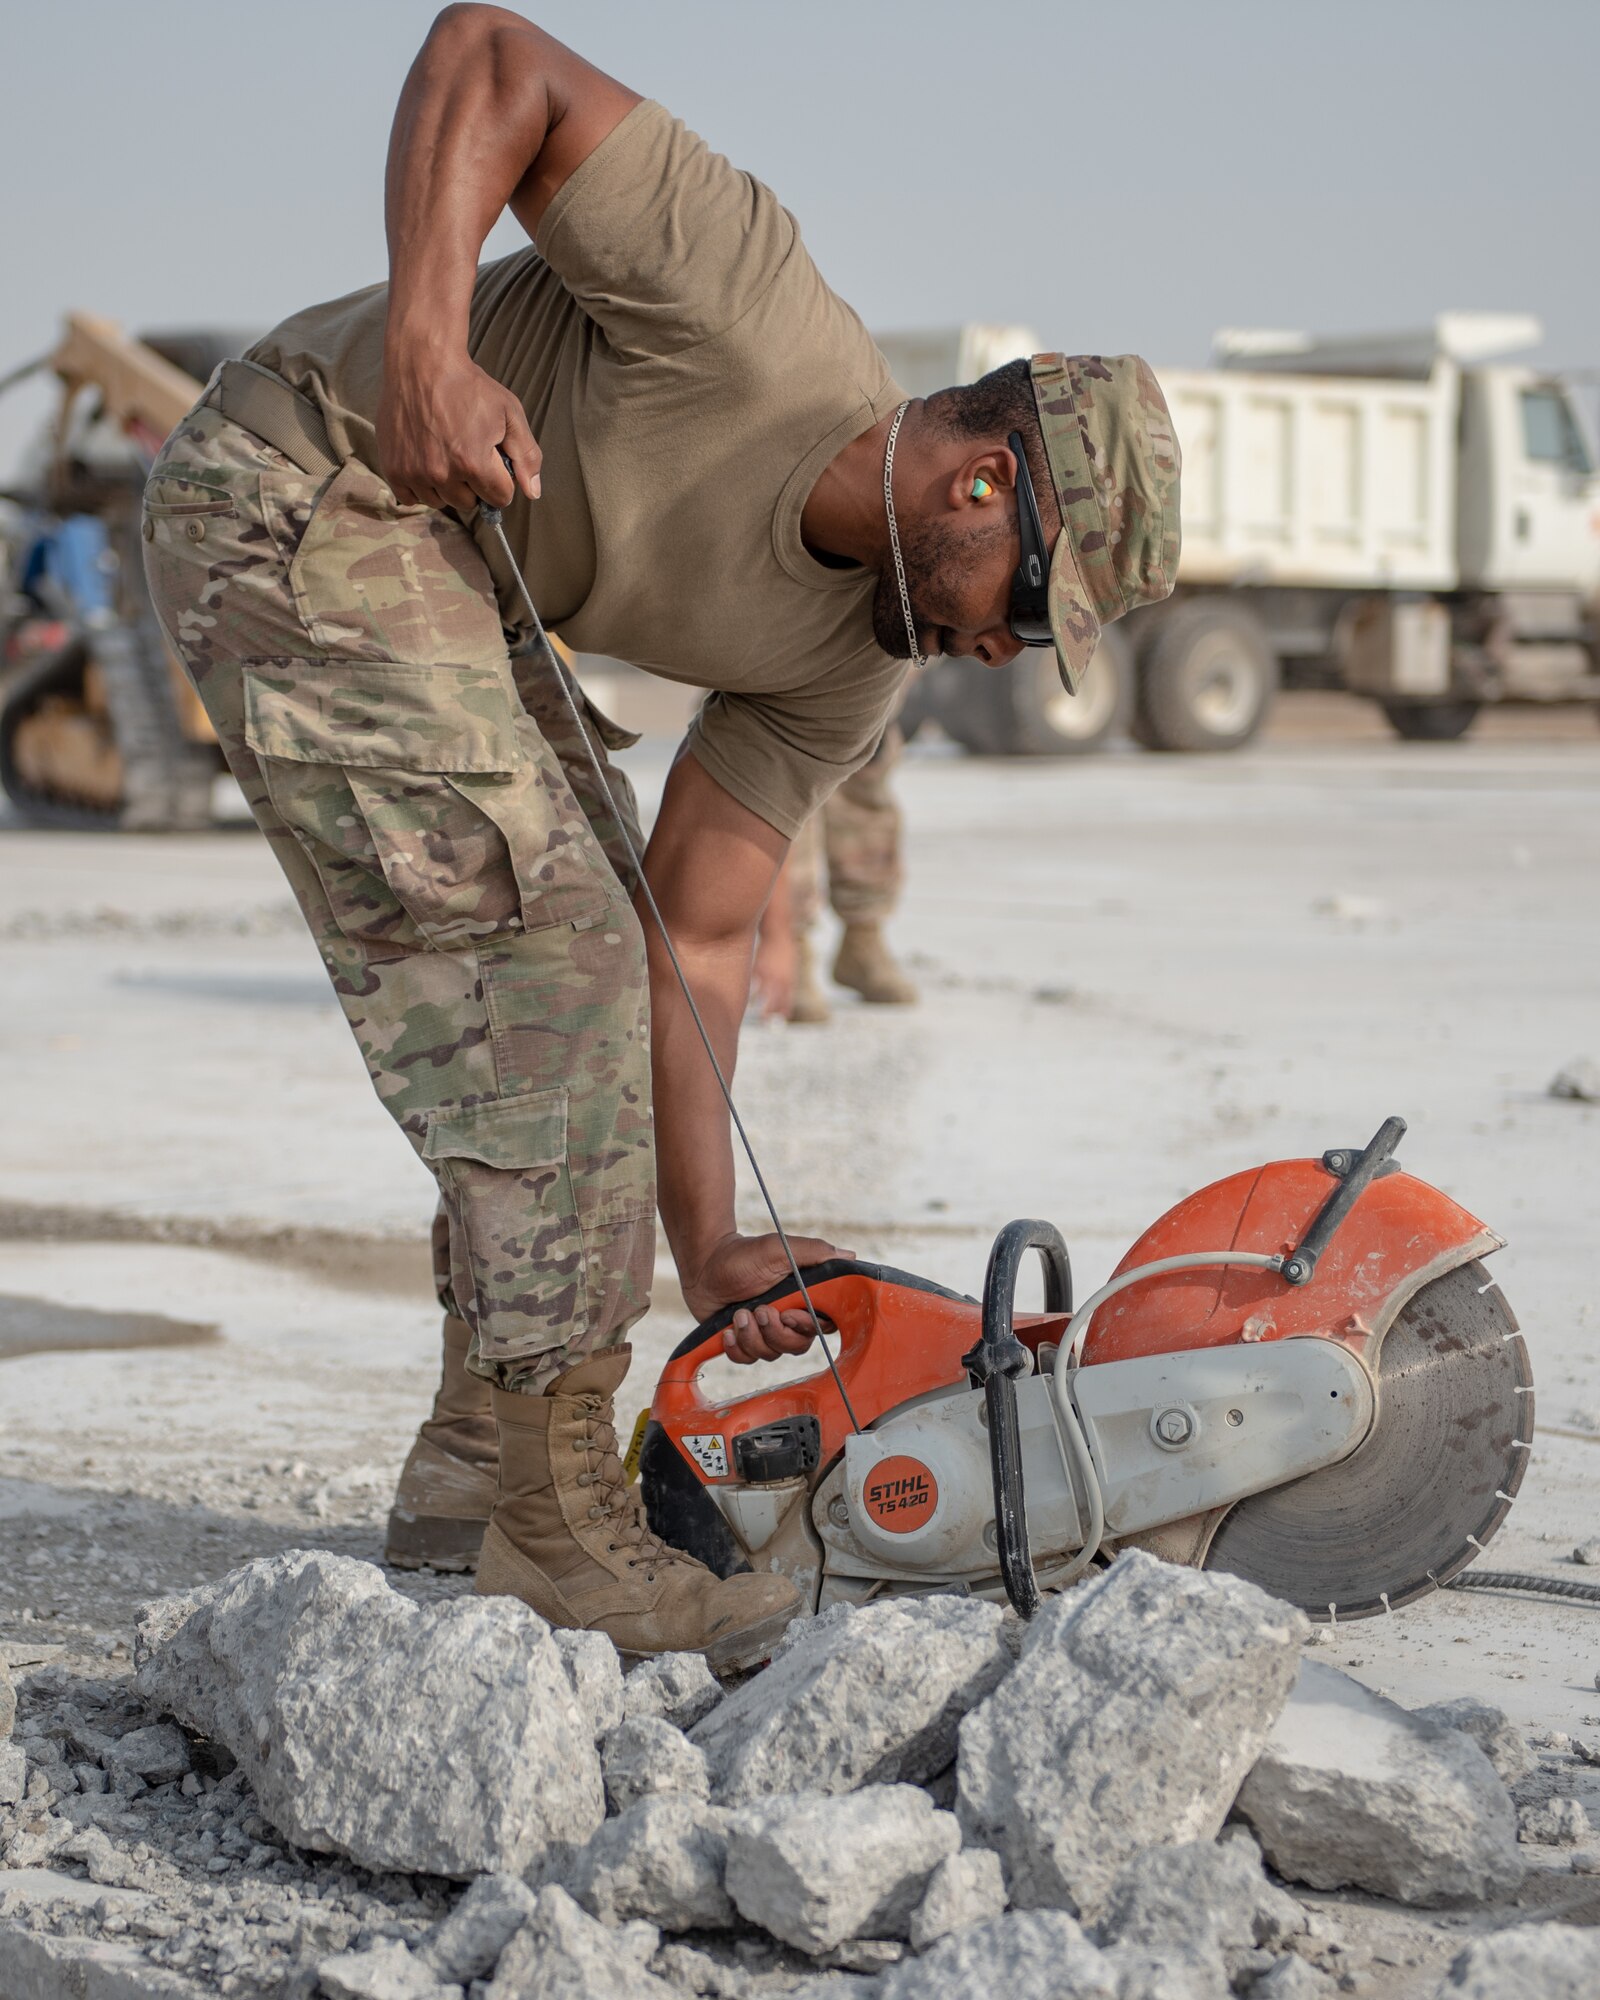 Senior Airman Brandon McLendon, 380th Expeditionary Civil Engineer Squadron heavy machine operator, pull starts a cut-off machine during a rapid airfield damage repair exercise July 26, 2019, at Al Dhafra Air Base, United Arab Emirates. The saw is used to cut rebar to create more room for an excavator to remove damaged concrete. (U.S. Air Force photo by Staff Sgt. Chris Thornbury)